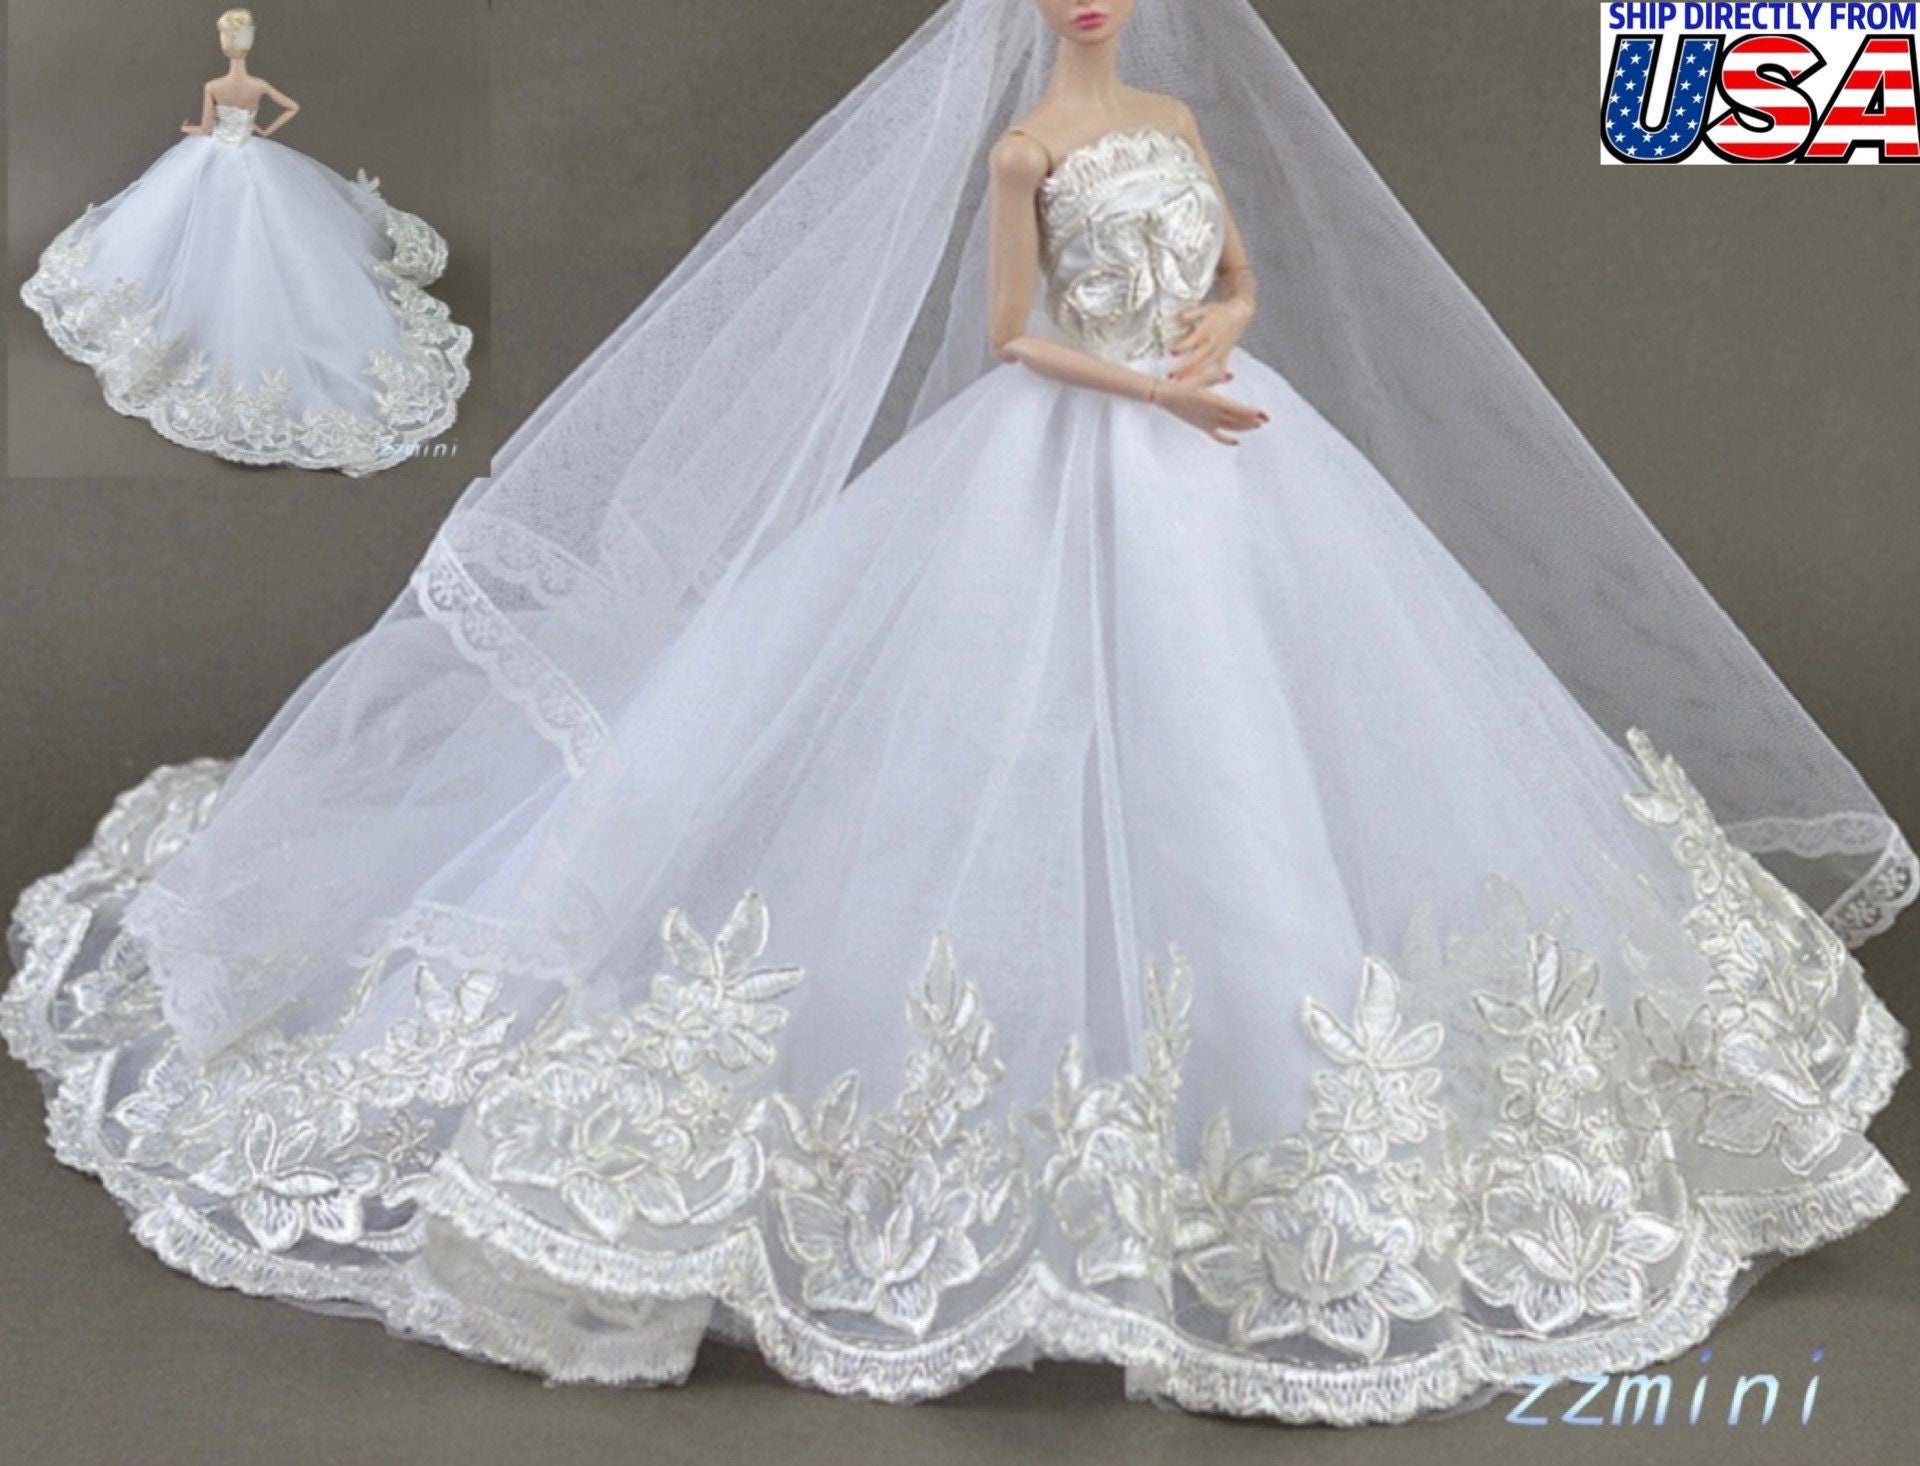 Ethnic Gowns | White Princess Gown Full Gher Very Beautiful Gow | Freeup